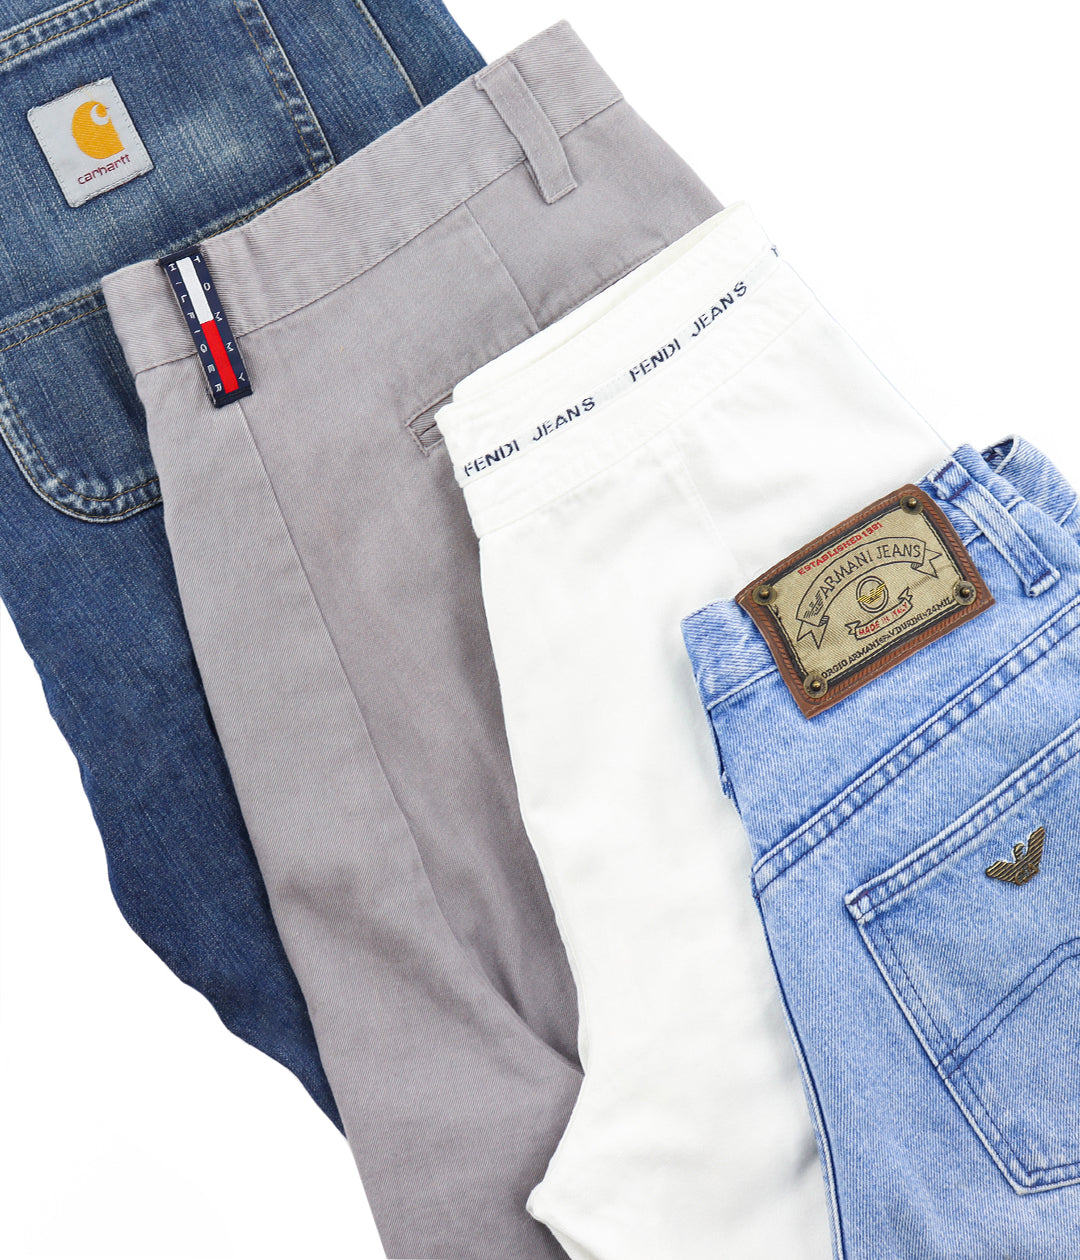 Best Selection of Assorted Branded Jeans Shorts